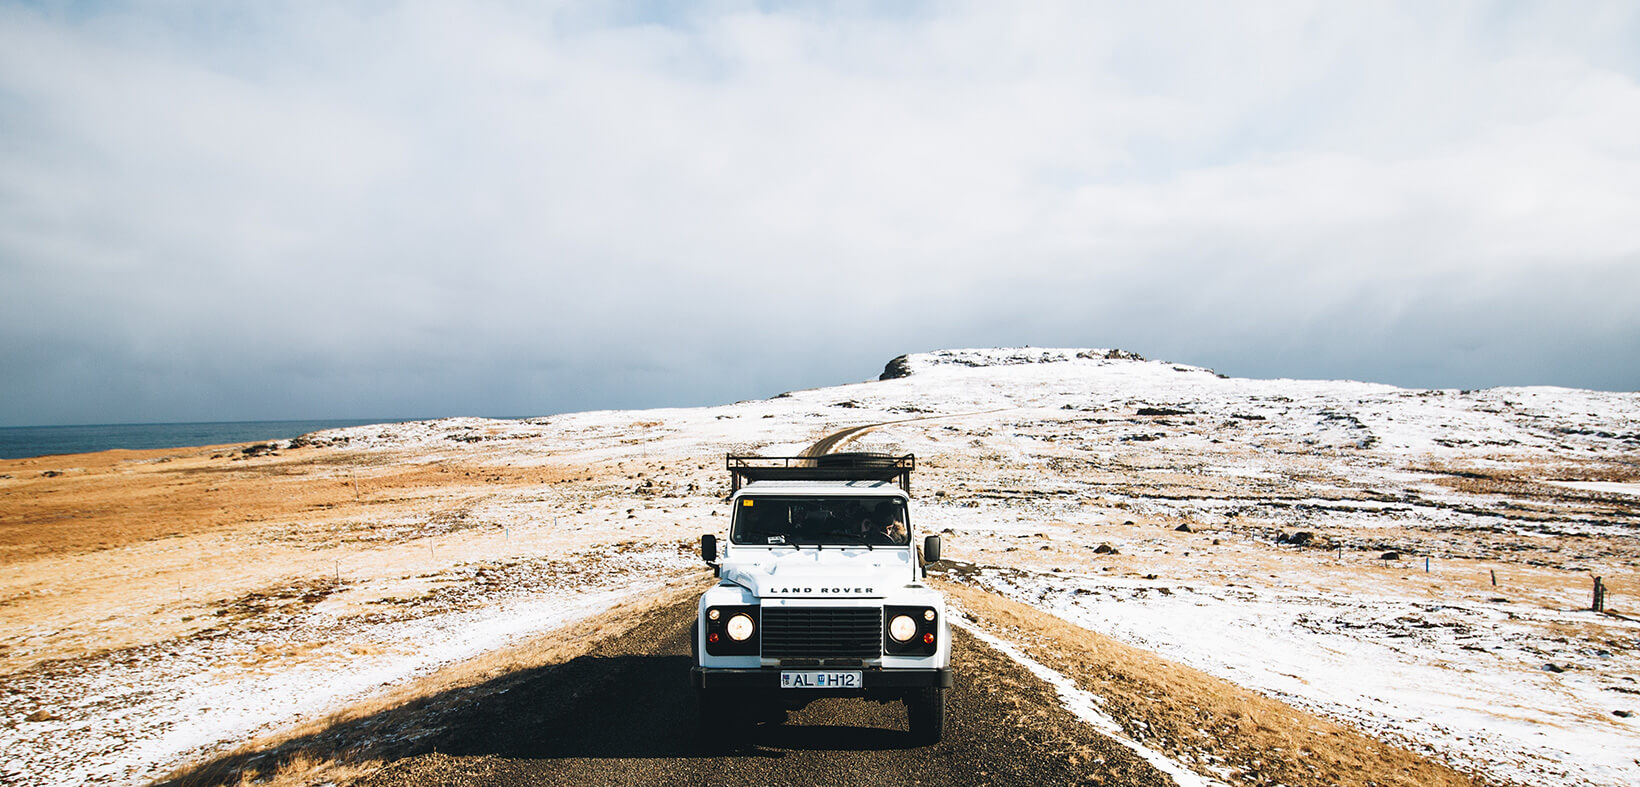 Landrover in Iceland